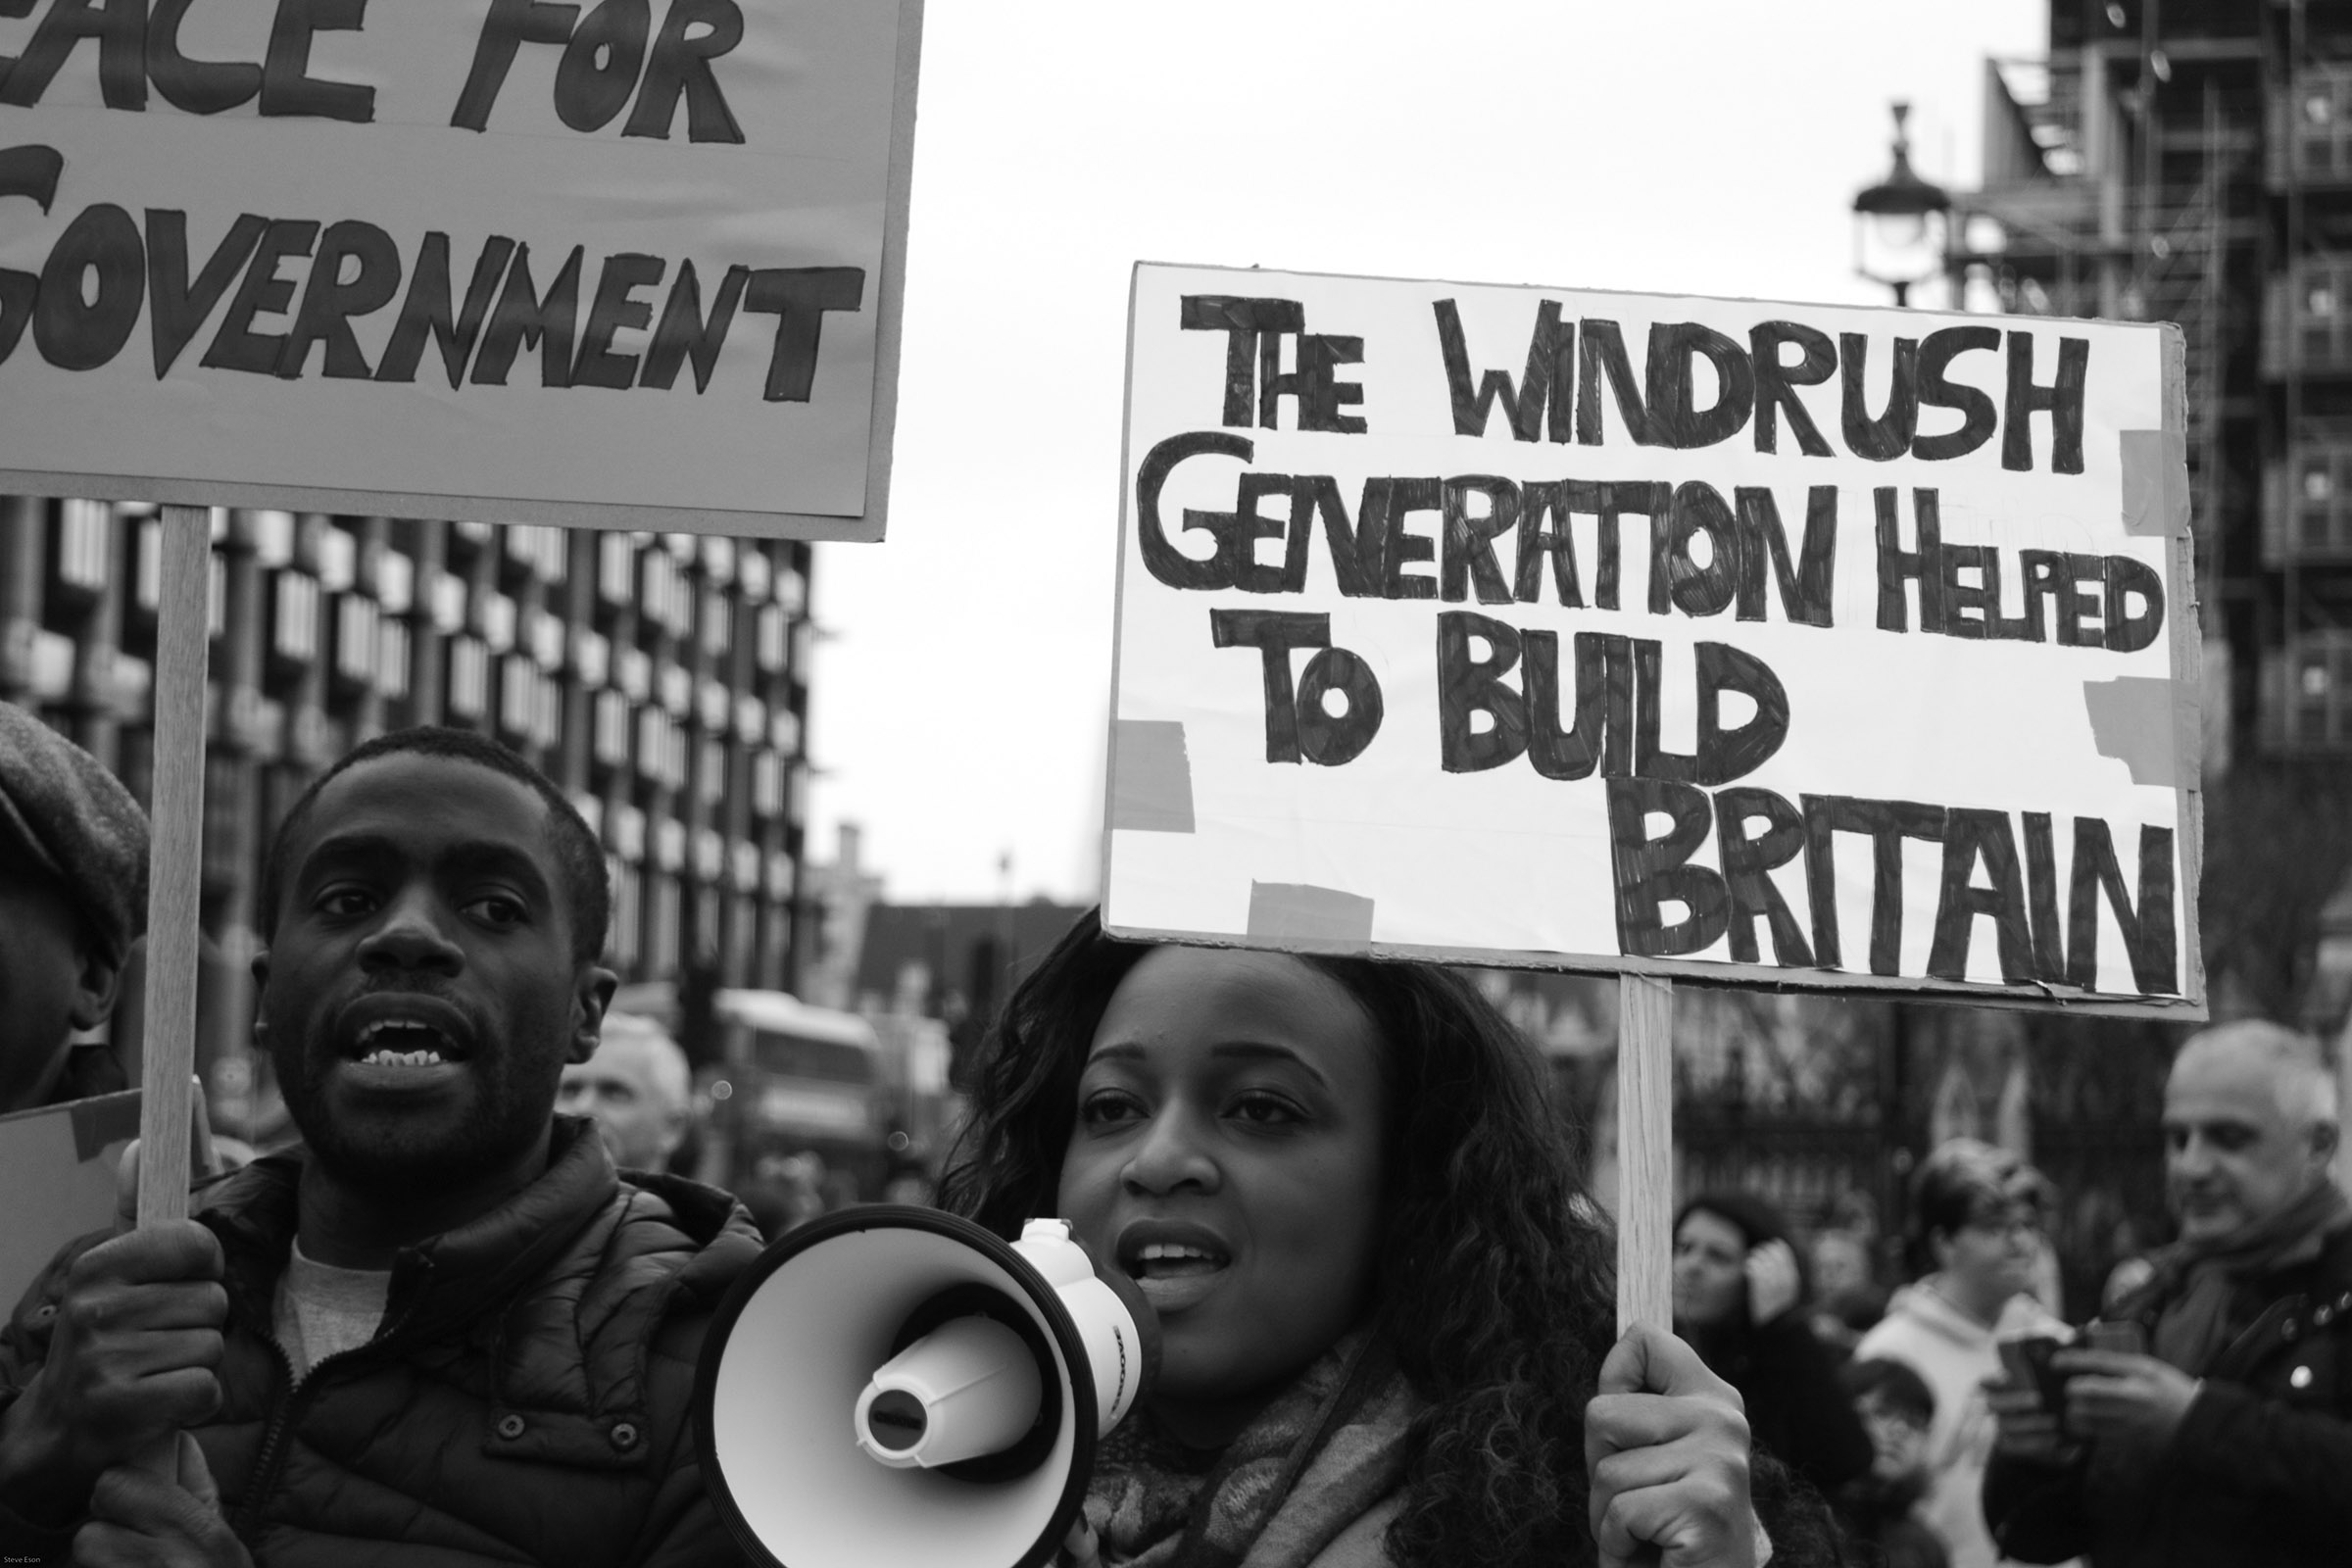 Two people, one with a megaphone, hold signs on a street; one sign says "The Windbrush Generation helped to build Britain."